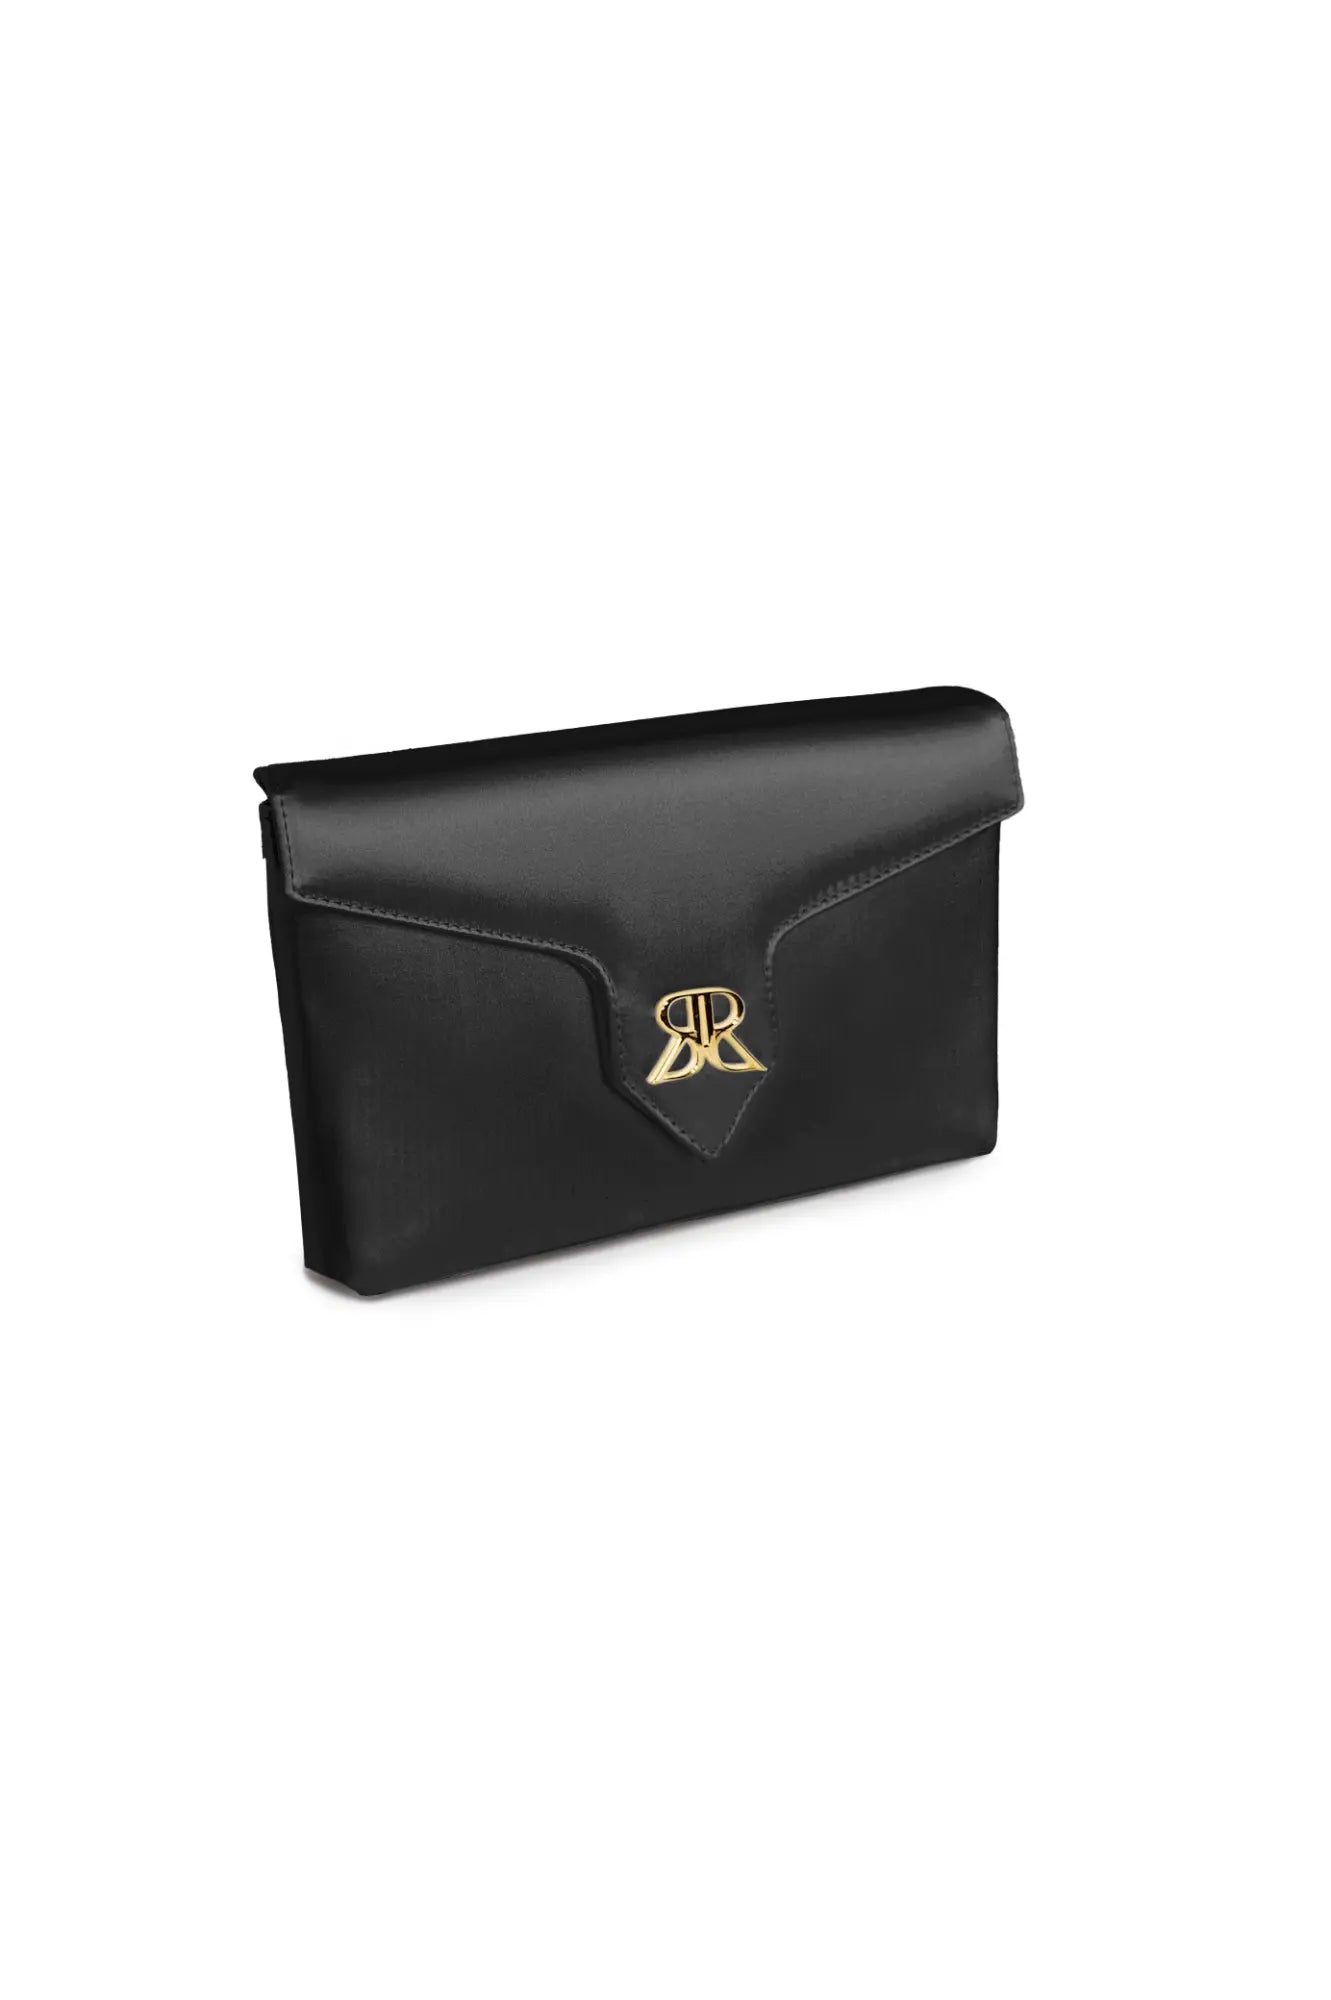 Love Note Envelope Clutch Black by The Bella Rosa Collection with a metallic logo clasp on a white background.